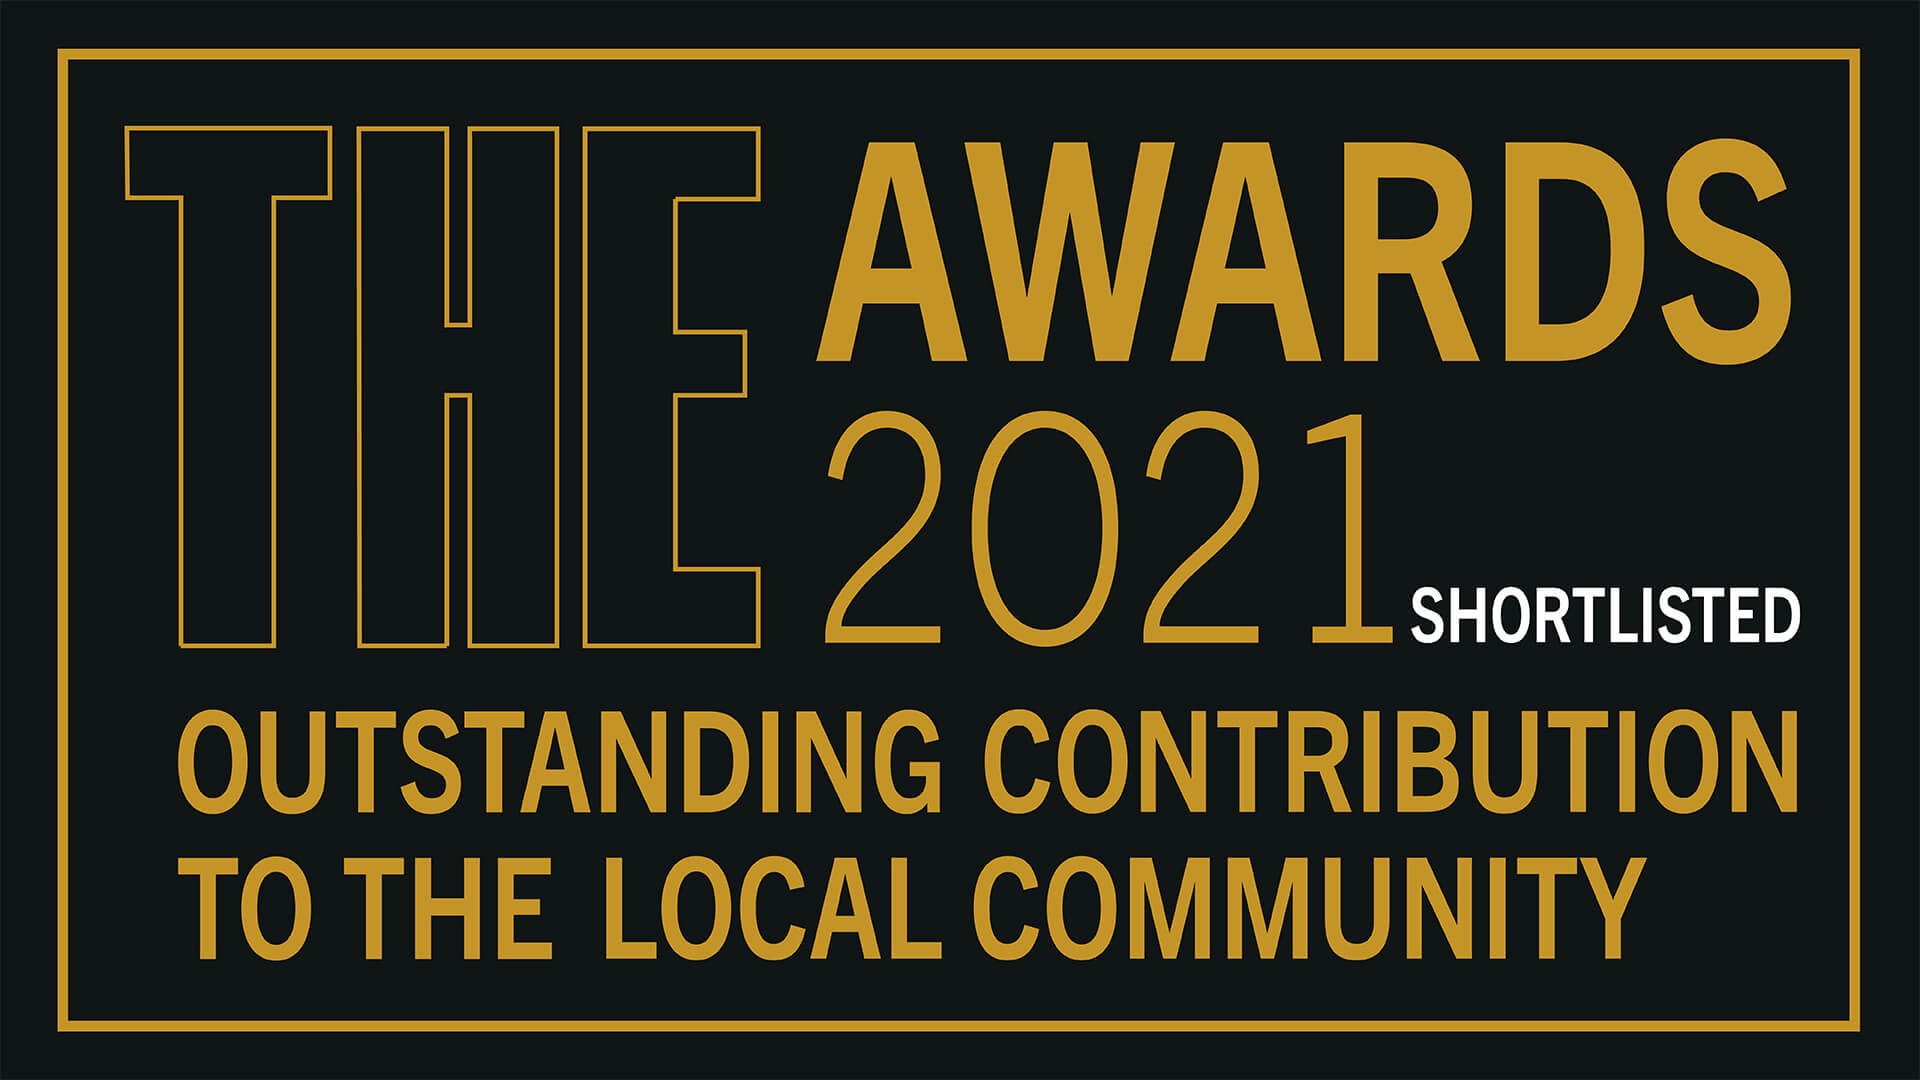 Times Higher Education Awards 2021 Shortlisted for Outstanding Contribution to the Local Community logo